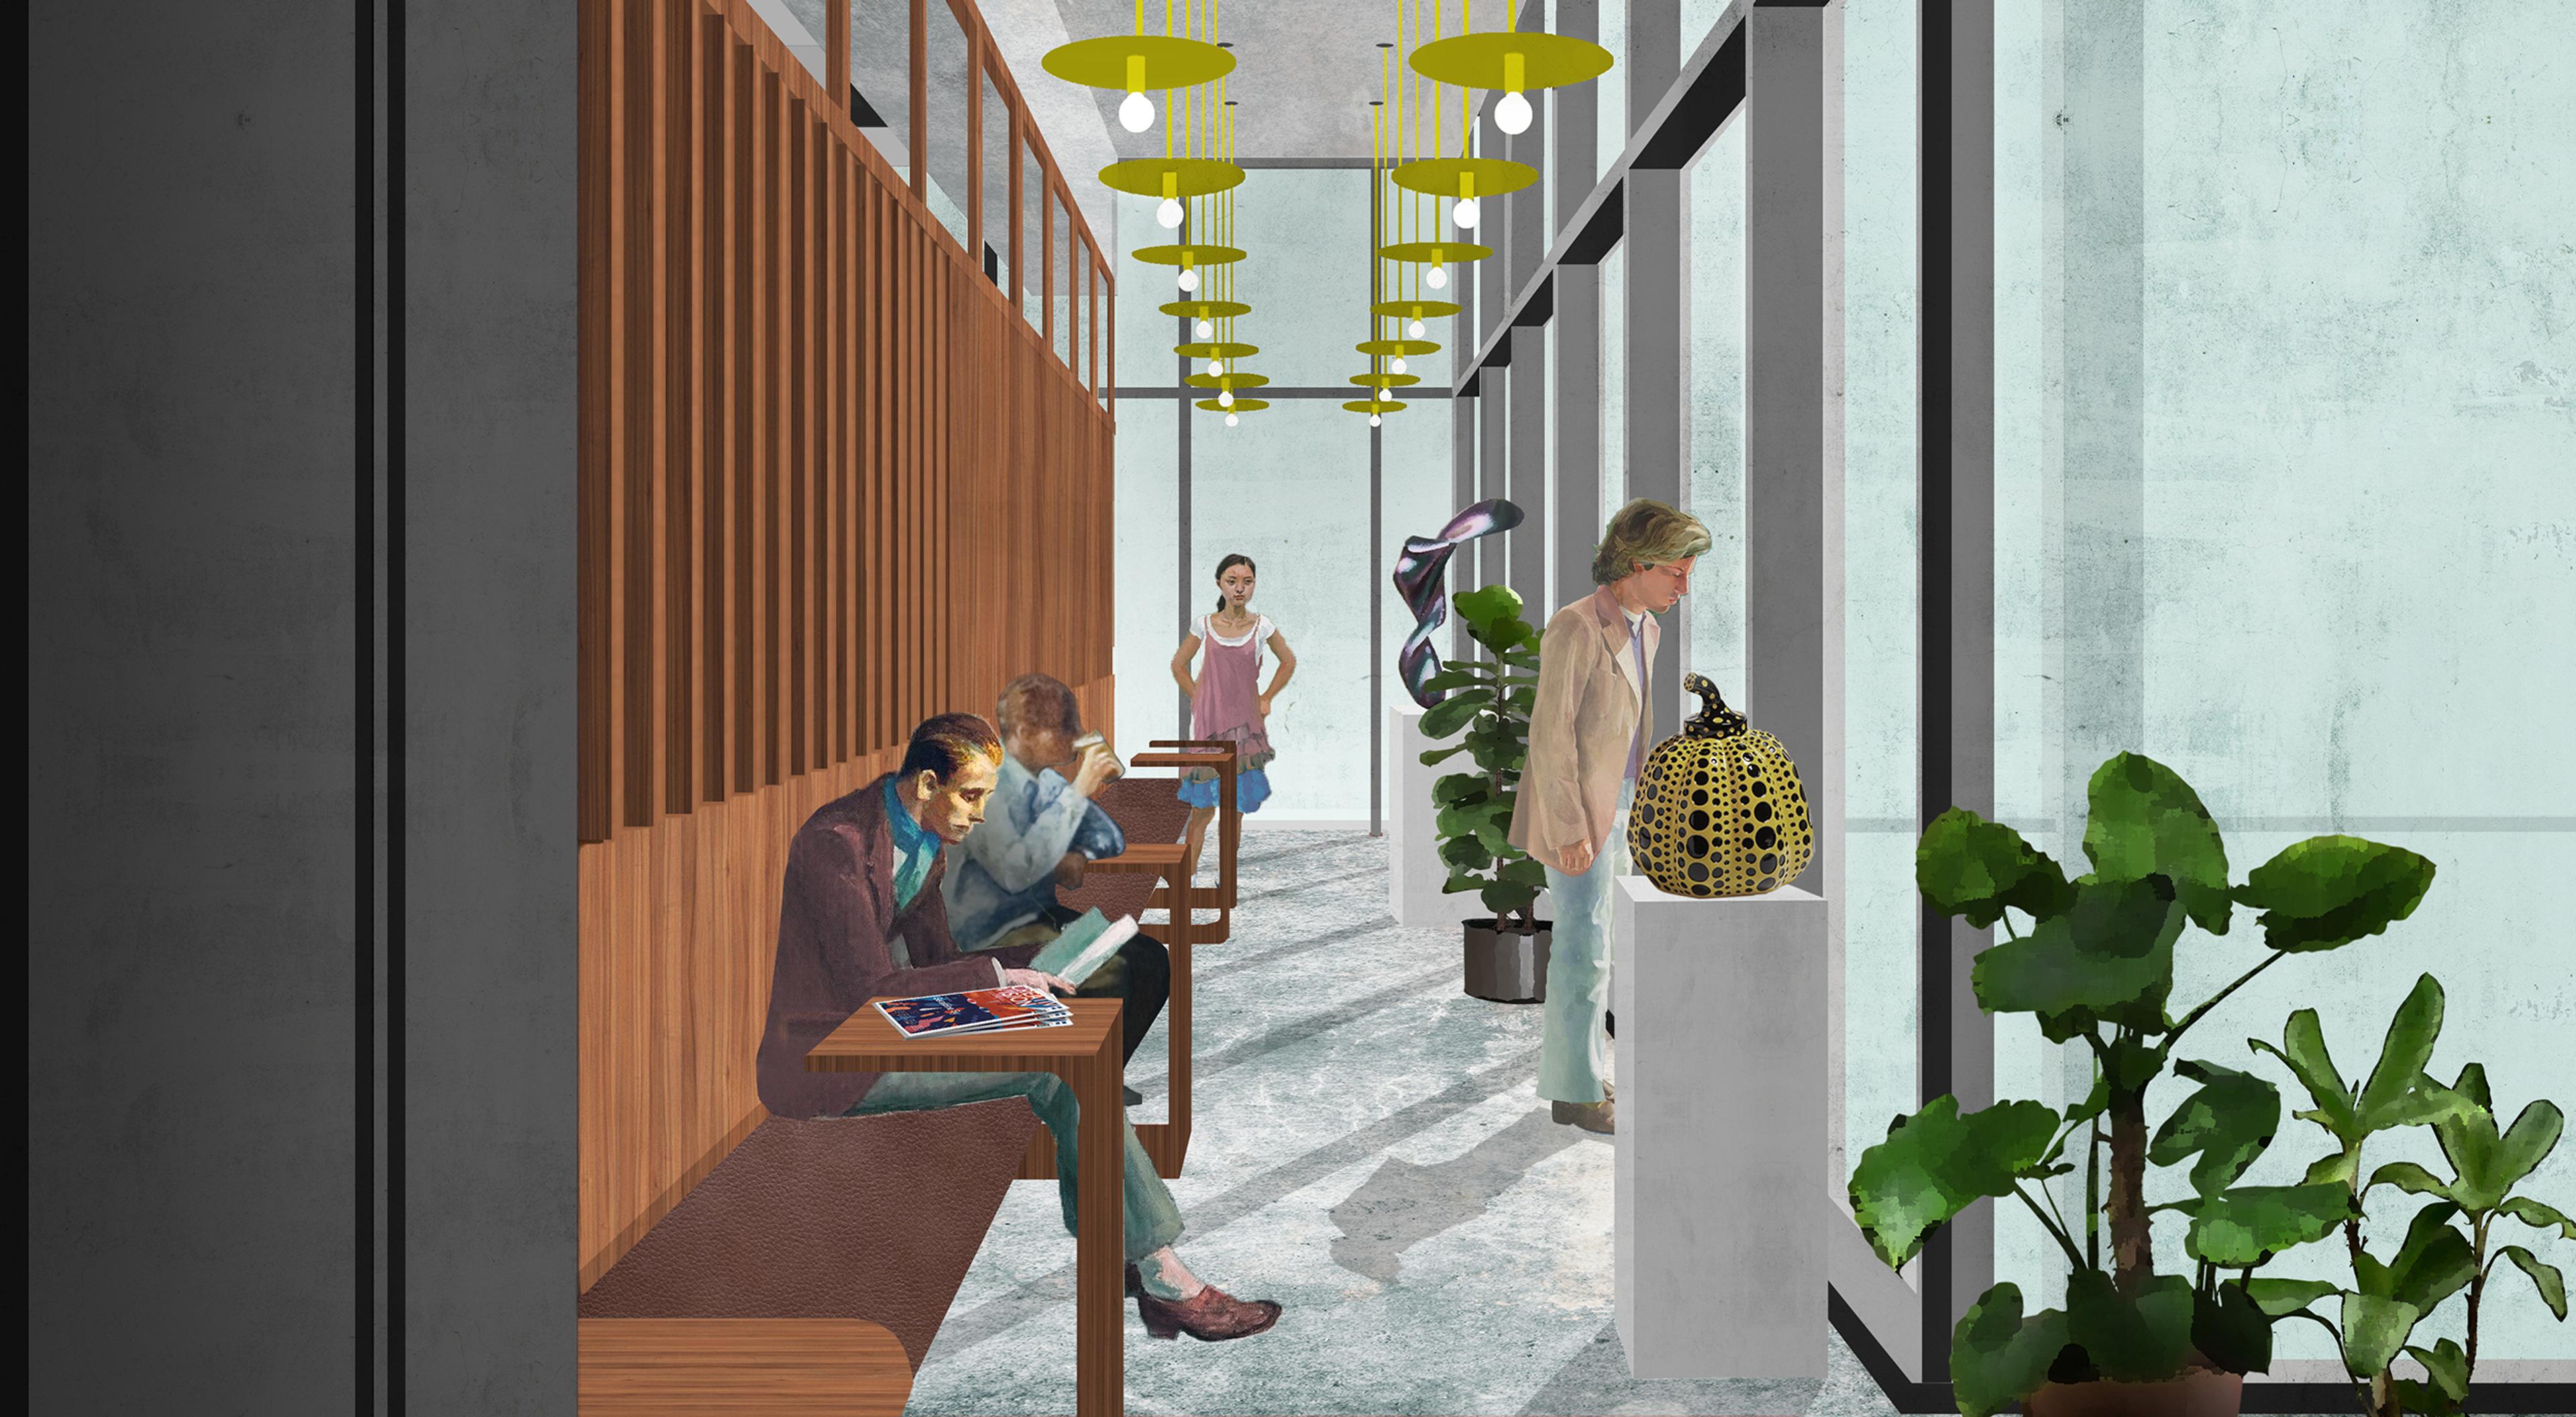 architectural rendering of modern office interior reception area with people